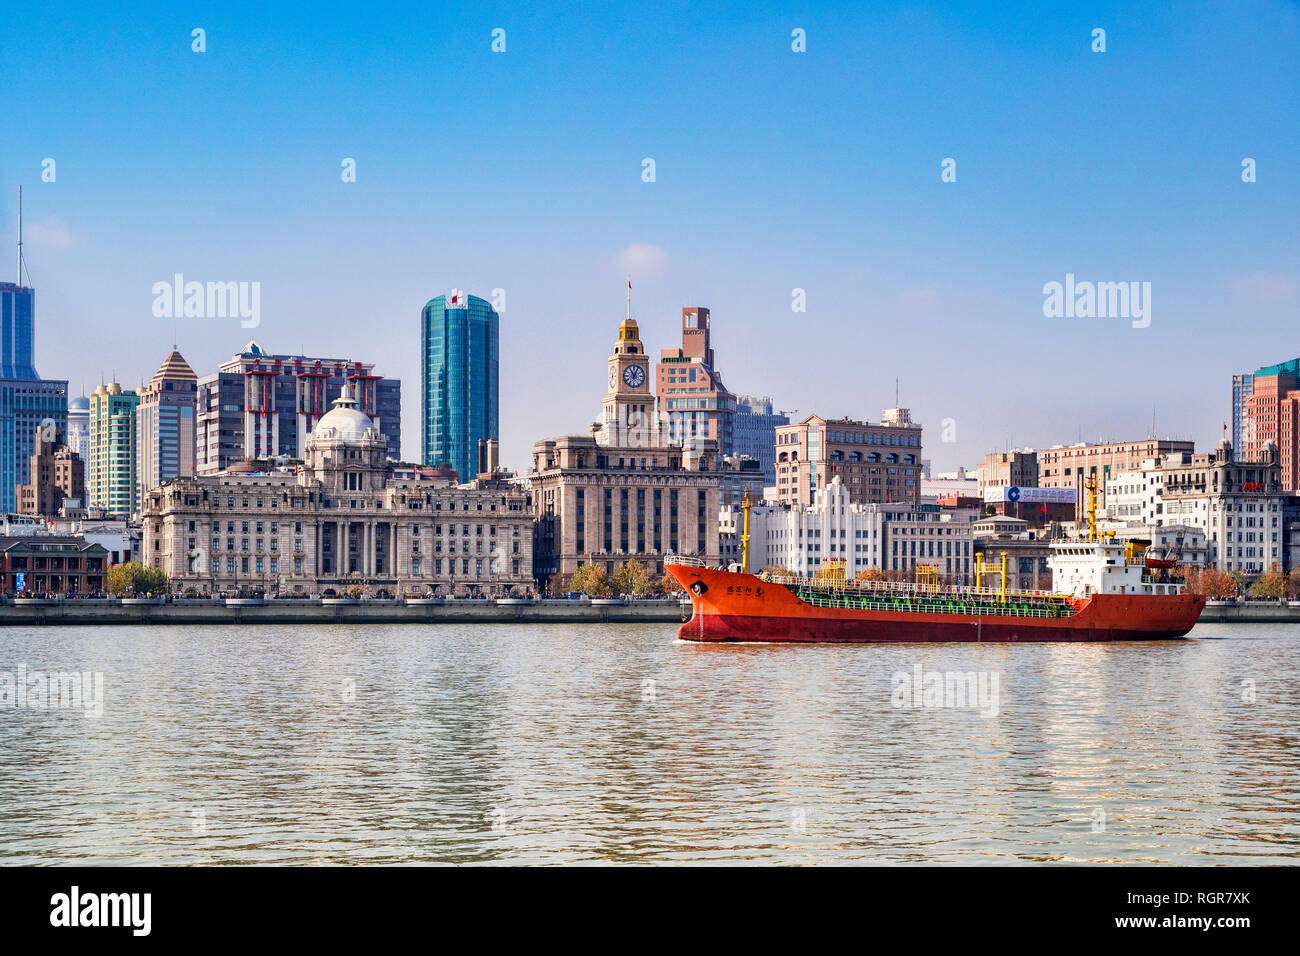 1 December 2018: Shanghai, China - Cargo ship on the Huangpu River passing The Bund, the historic business area of Shanghai. Stock Photo